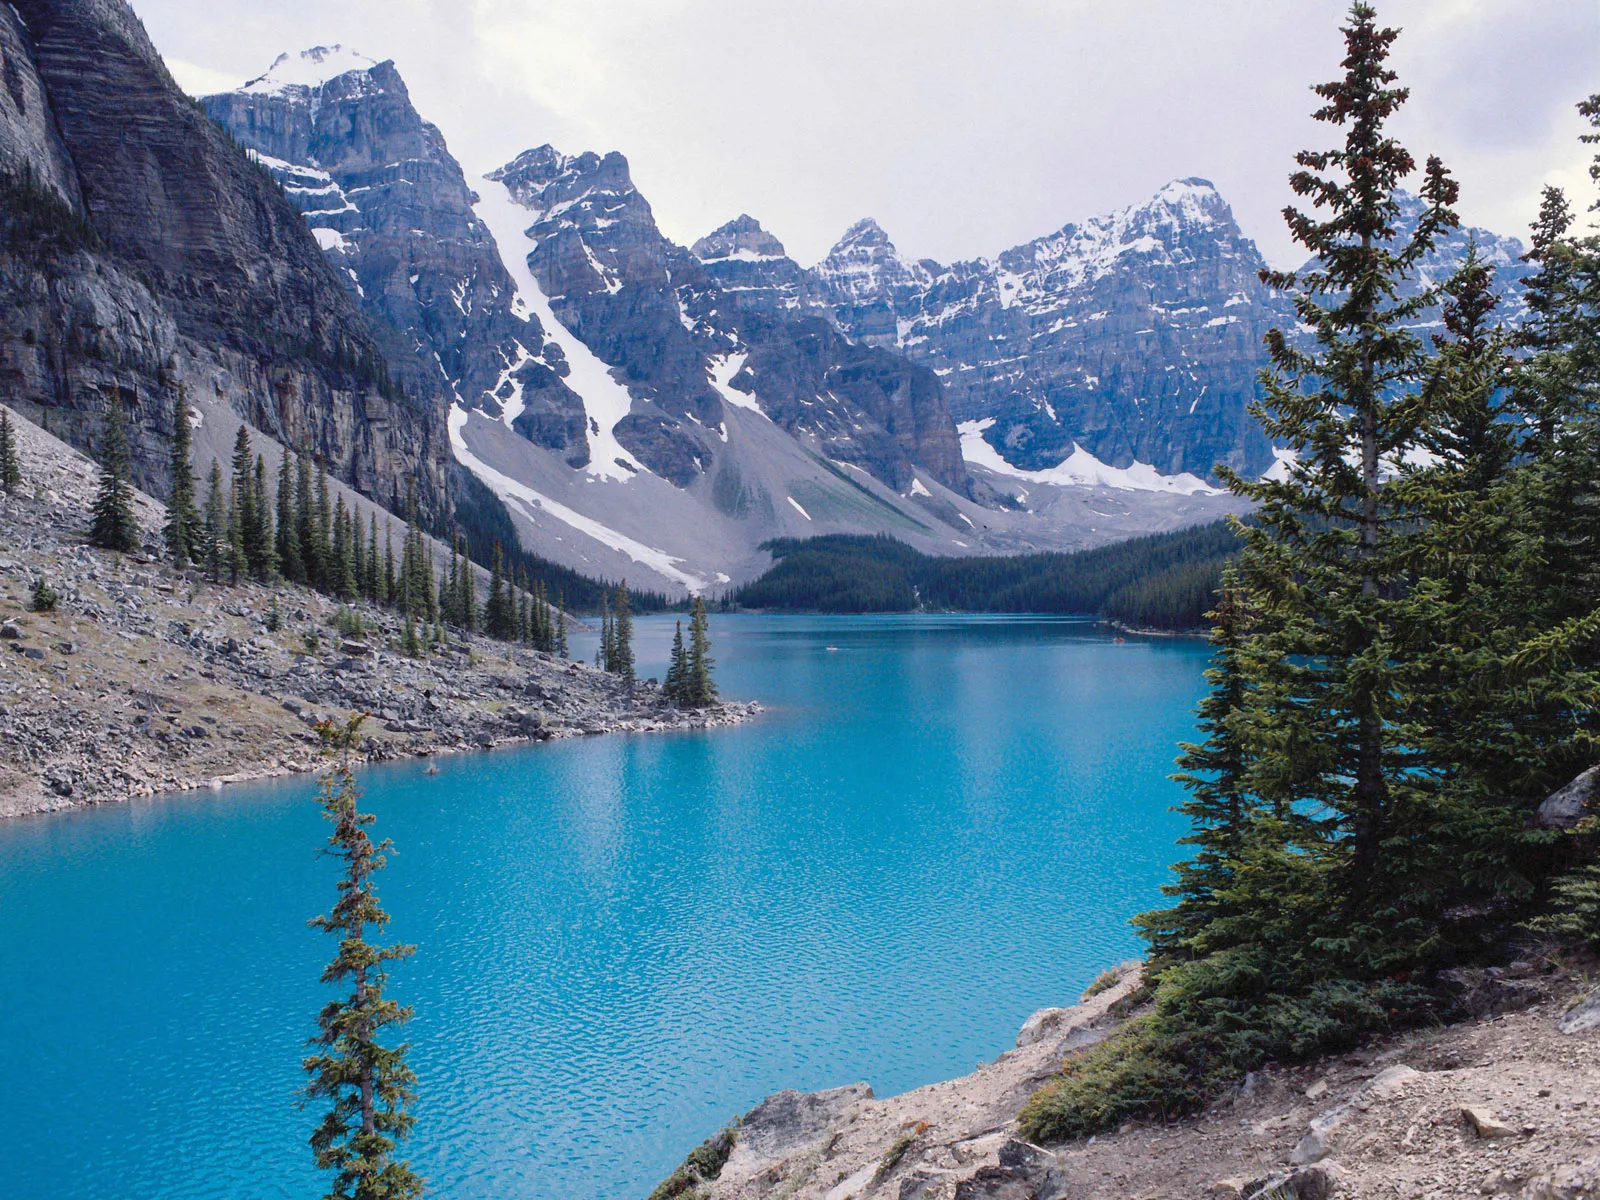 Embark on a journey of awe-inspiring natural beauty in Banff National Park, home to rugged mountain peaks, turquoise lakes, and abundant wildlife. Hike along scenic trails, paddle on pristine waters, and soak in panoramic views of the Canadian Rockies in this wilderness paradise.]]>